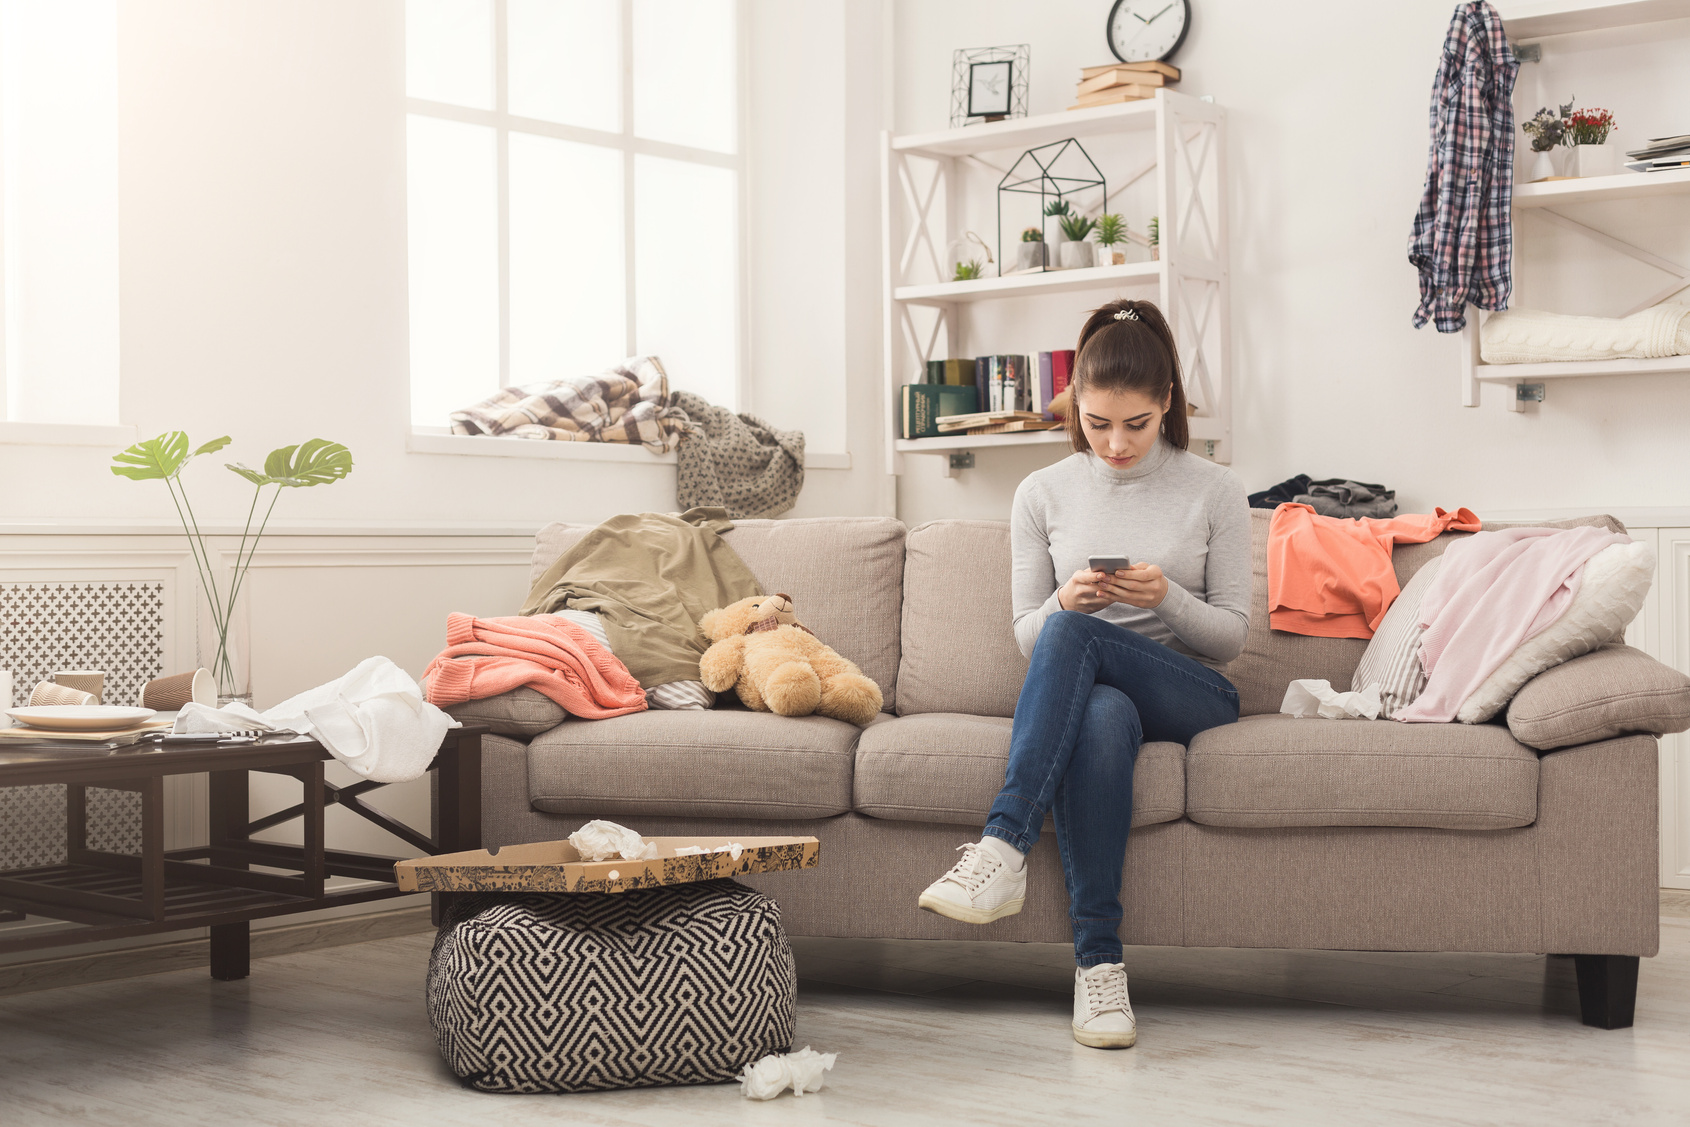 Desperate woman sitting on sofa in messy room